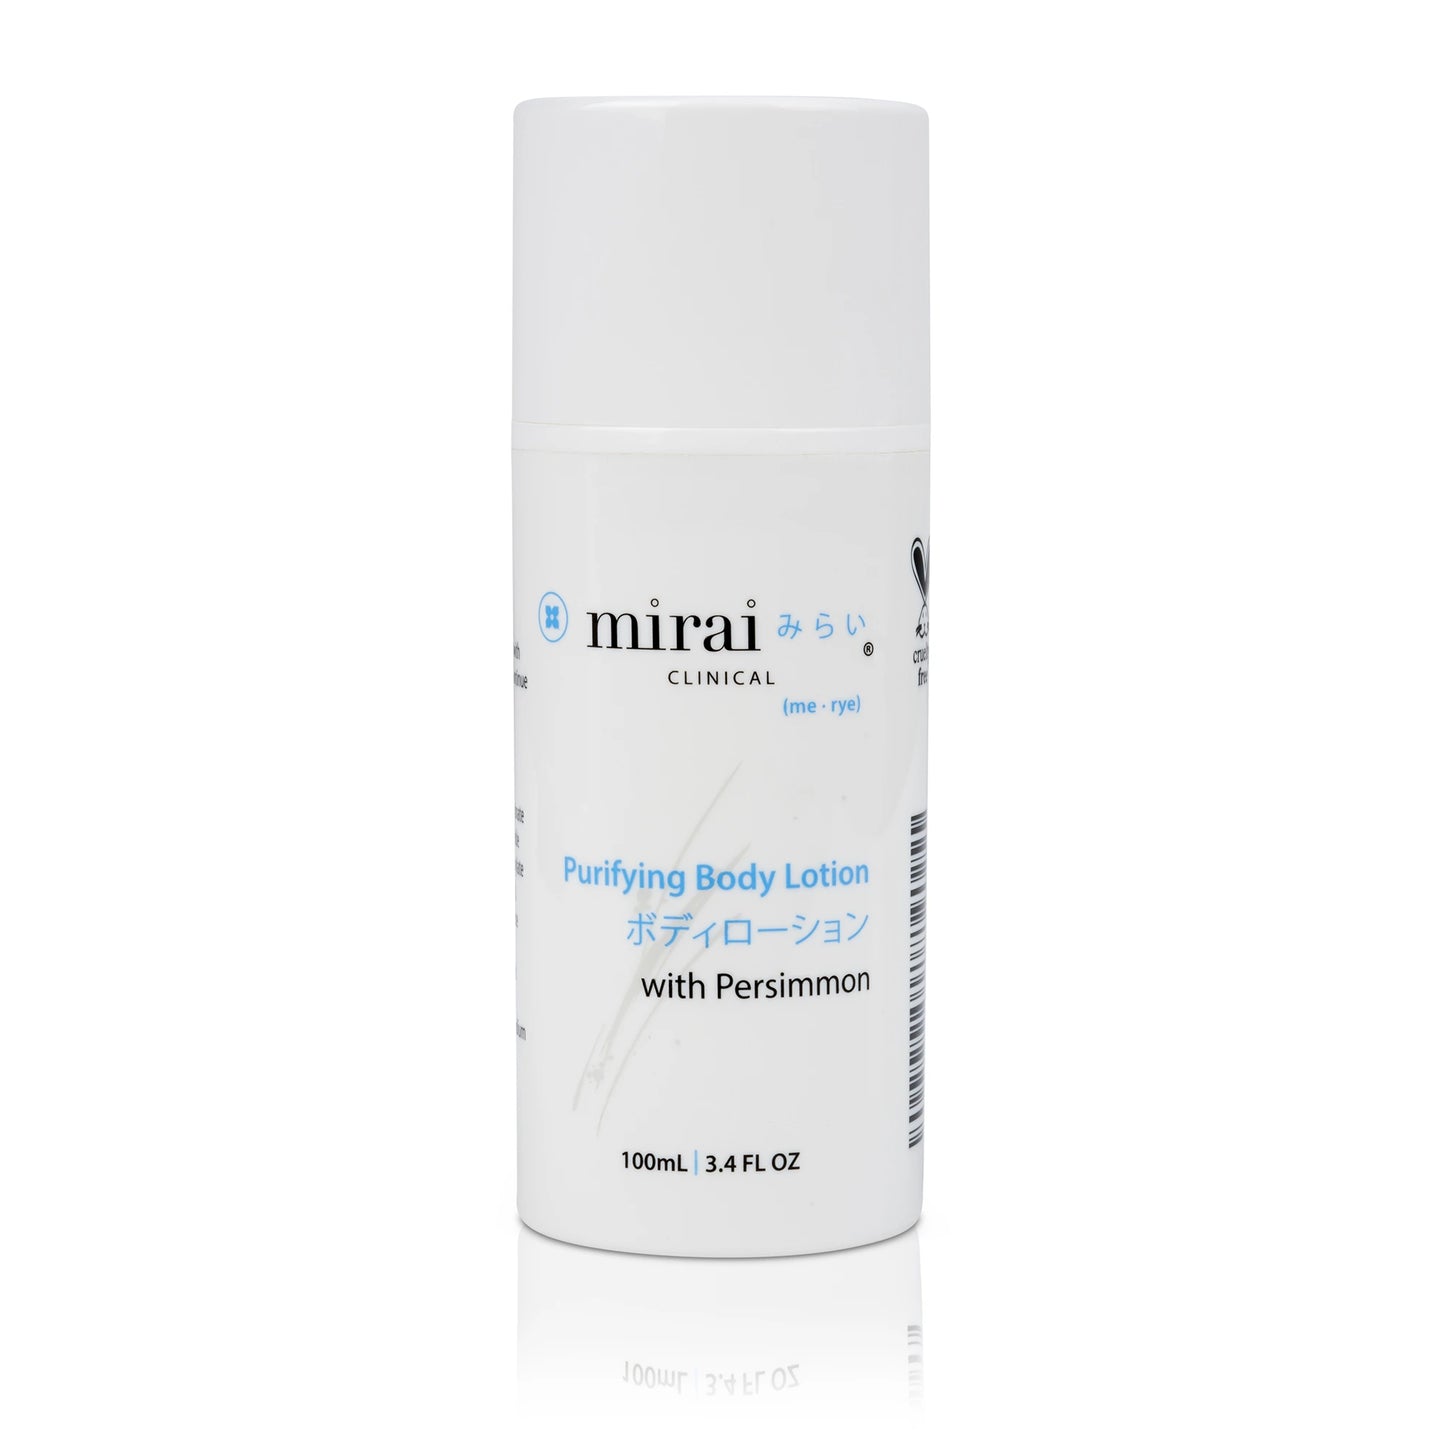 Bottle of purifying body lotion formulated to deodorize nonenal body odor using persimmon extract